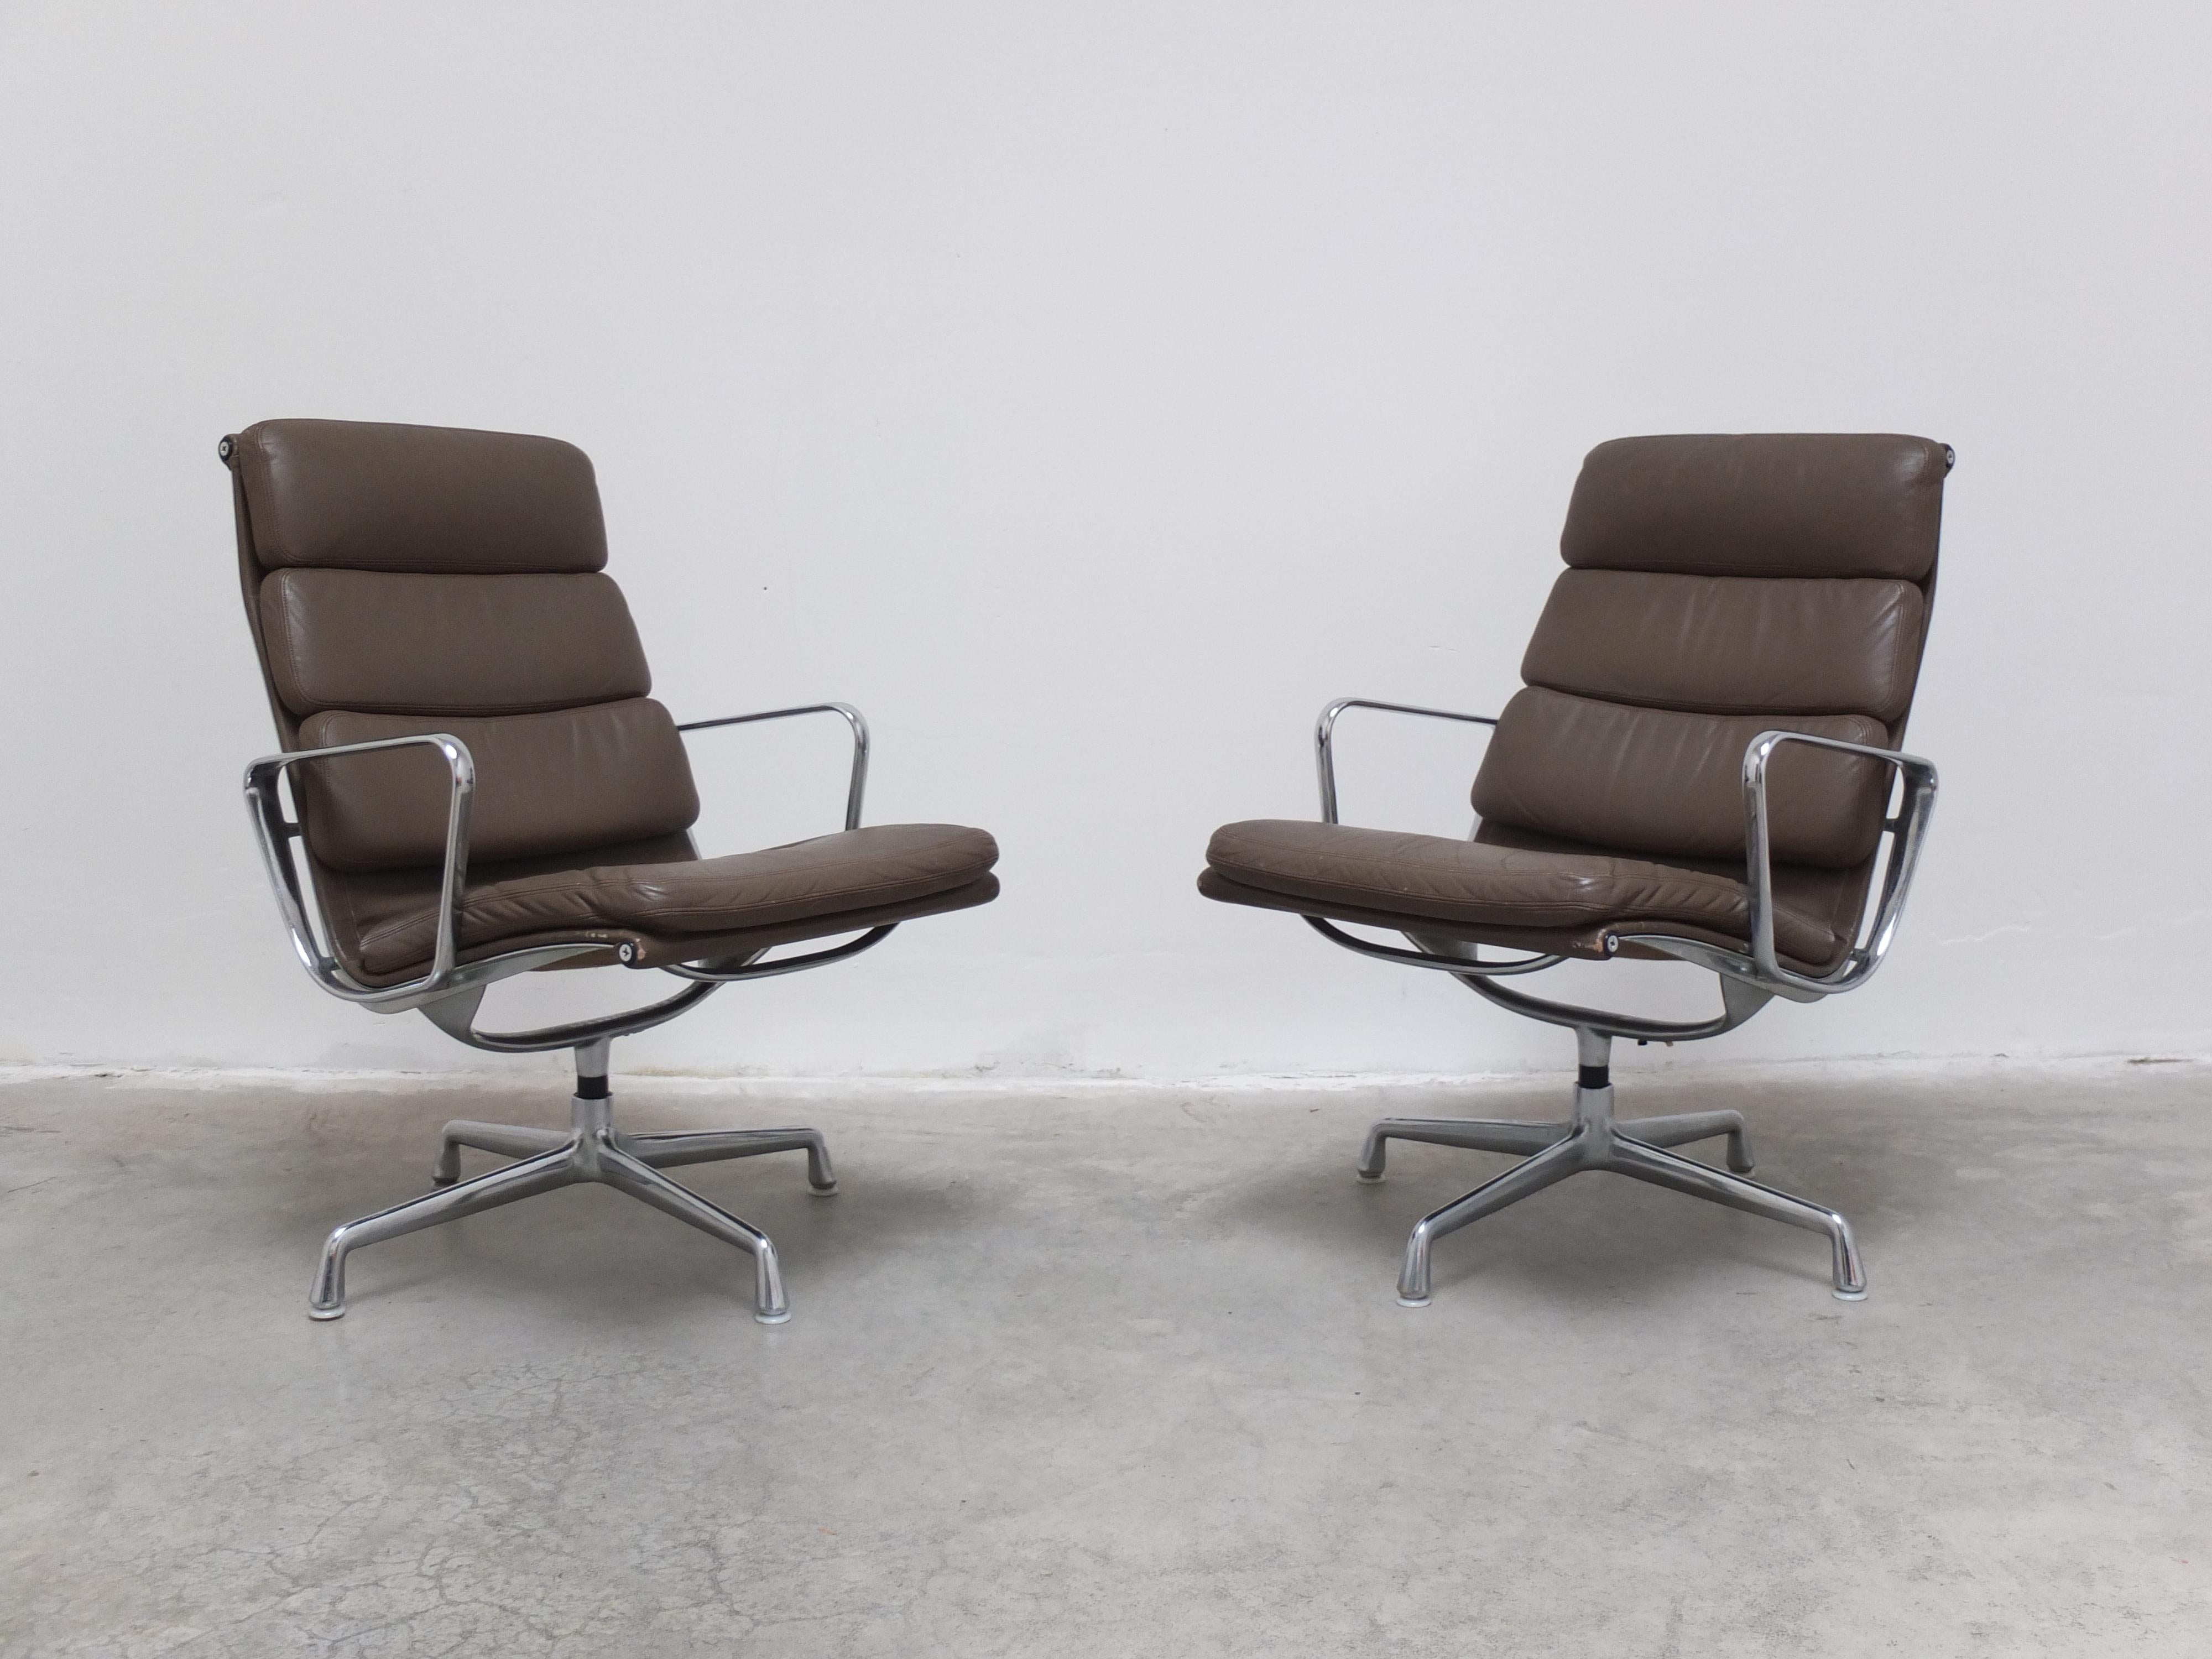 Early Pair of 'EA216' Chairs by Charles & Ray Eames for Herman Miller, 1970s For Sale 4